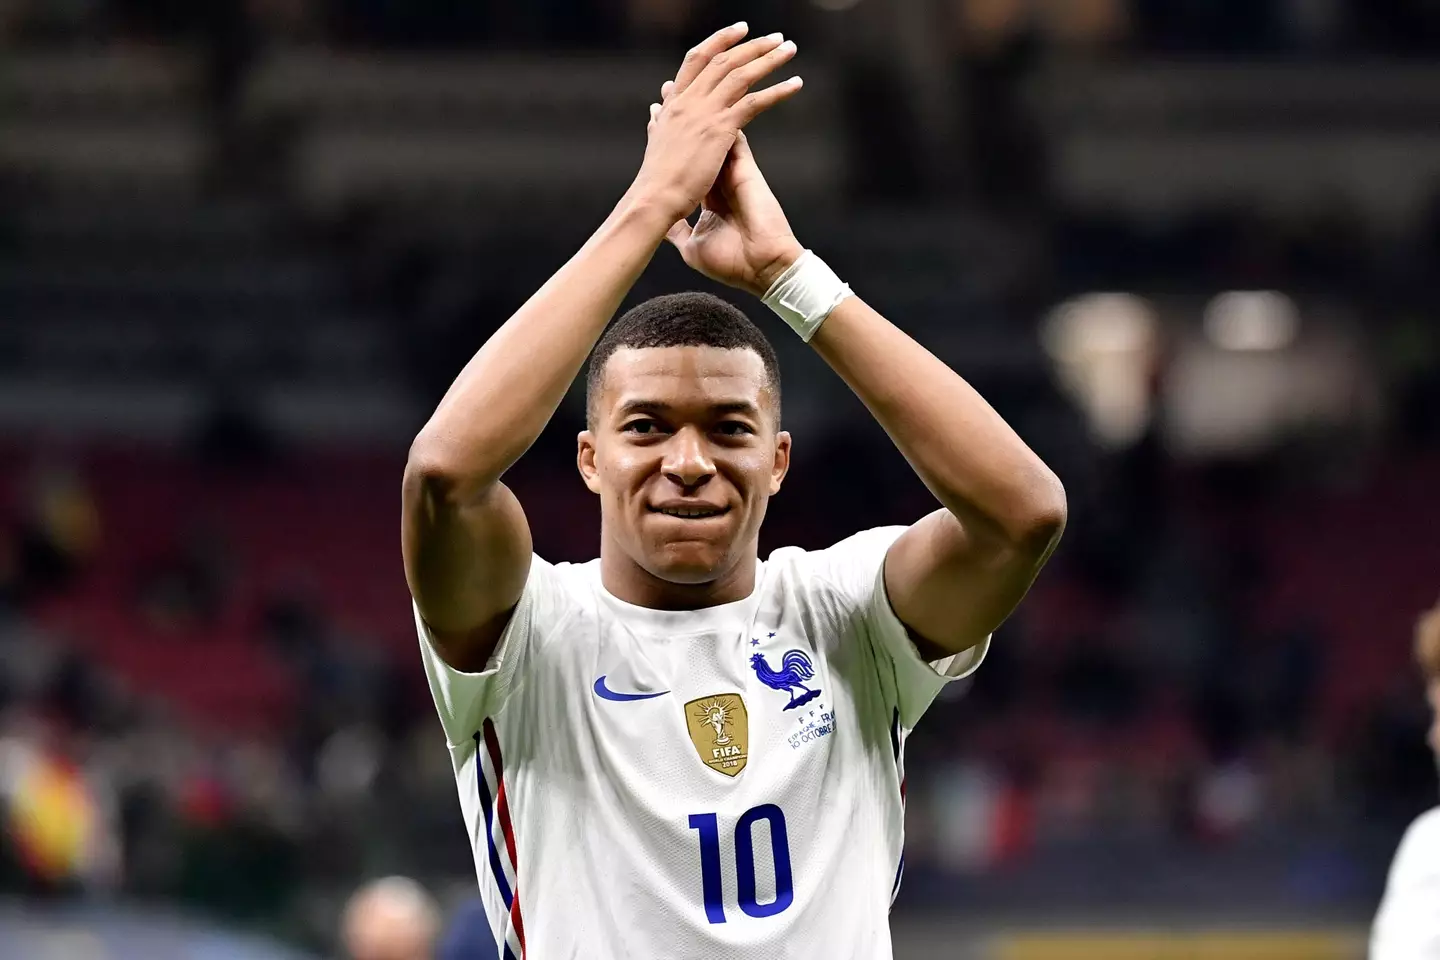 Could the tax cuts persuade the likes of Mbappe to move to England? Image: Alamy